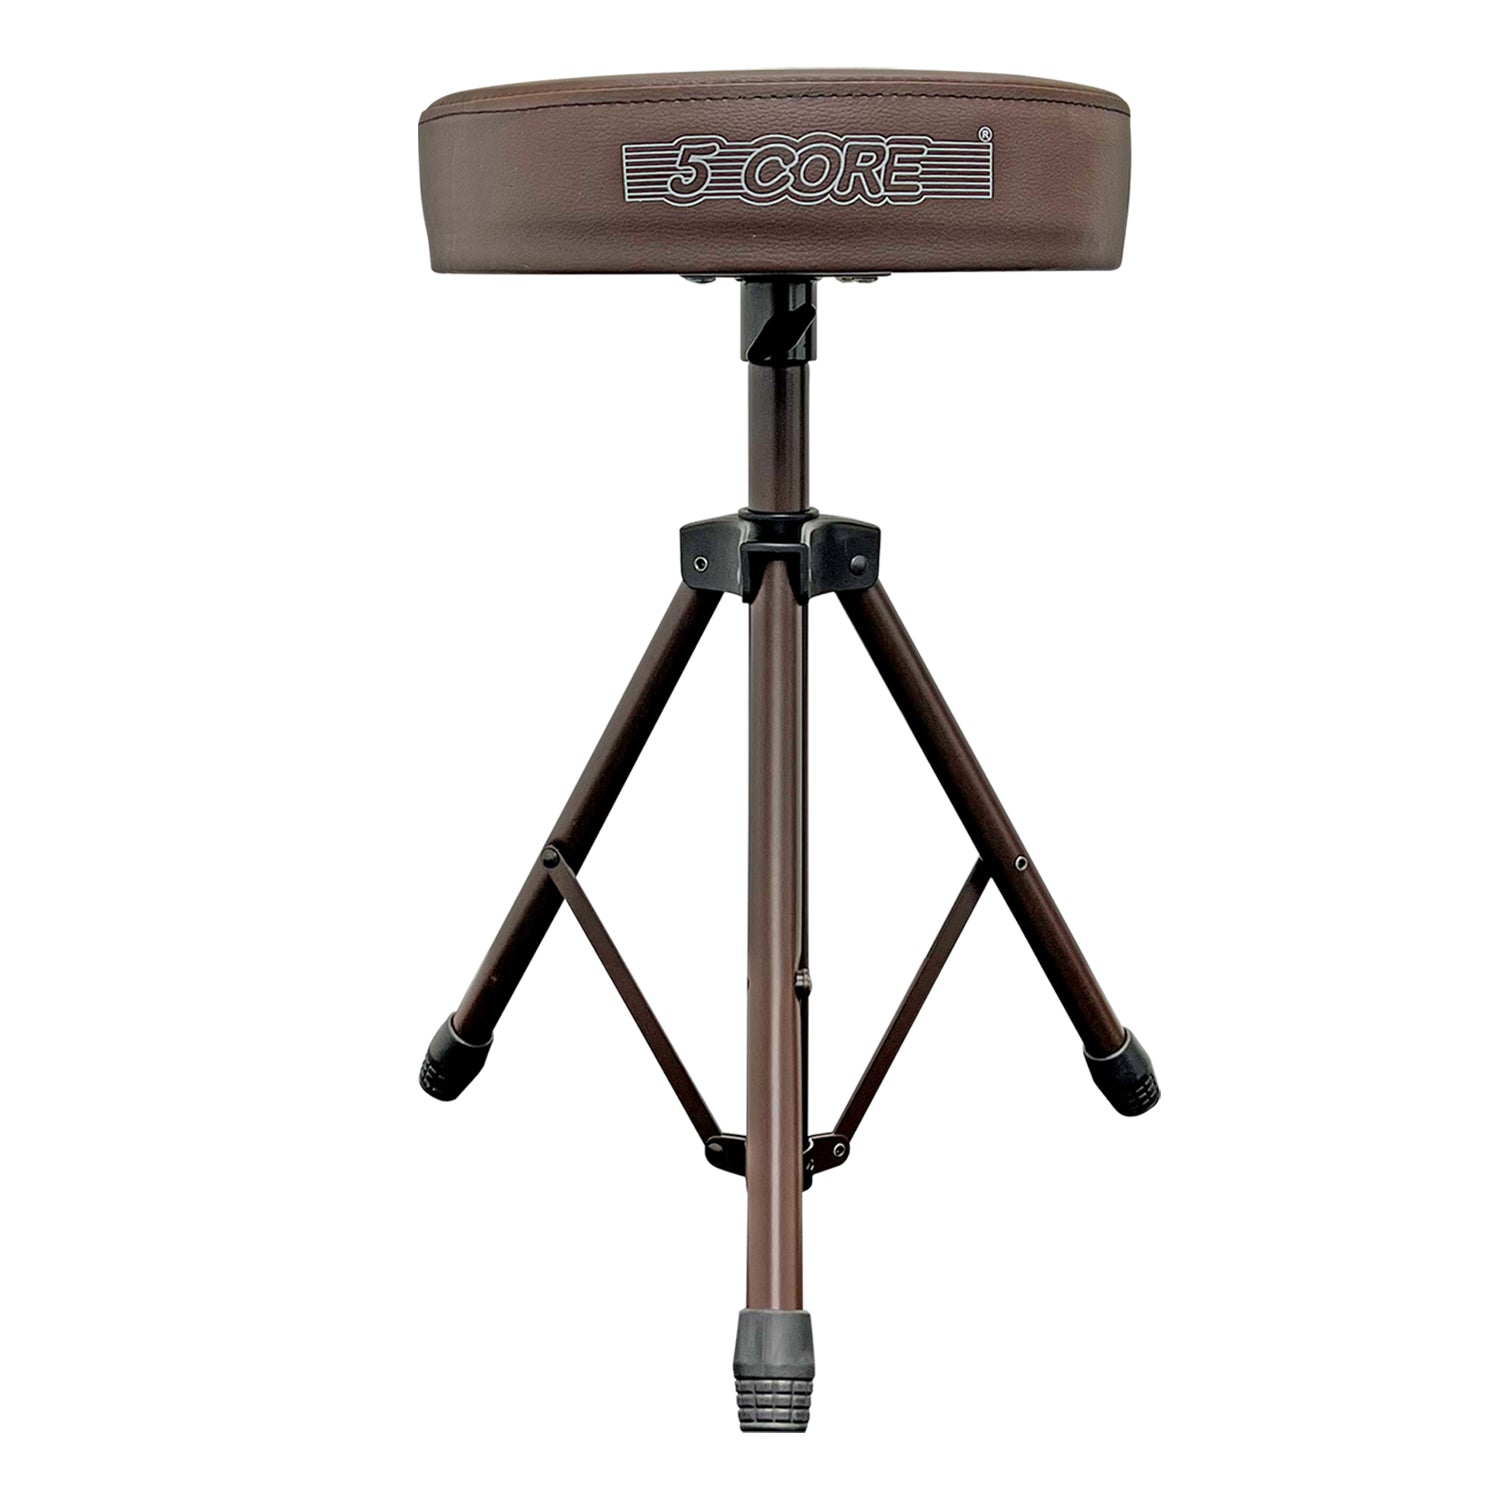 5 Core Drum Throne Guitar Stool Thick Padded Drummers Chair Piano Seat Brown